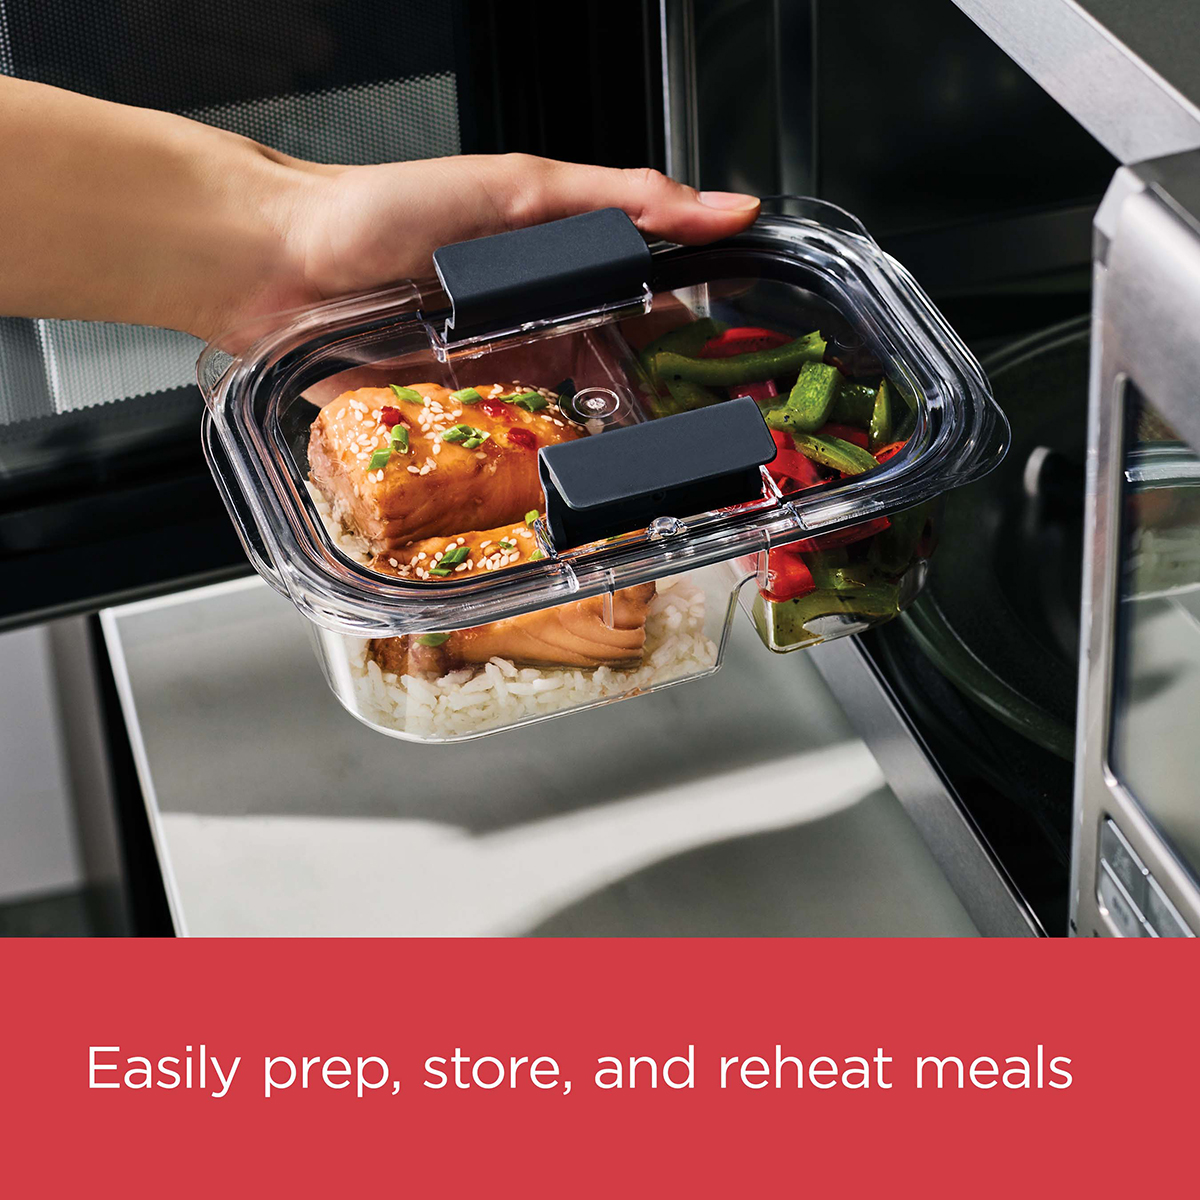 Rubbermaid® Brilliance Medium Containers - Clear, 3.2 c - Ralphs